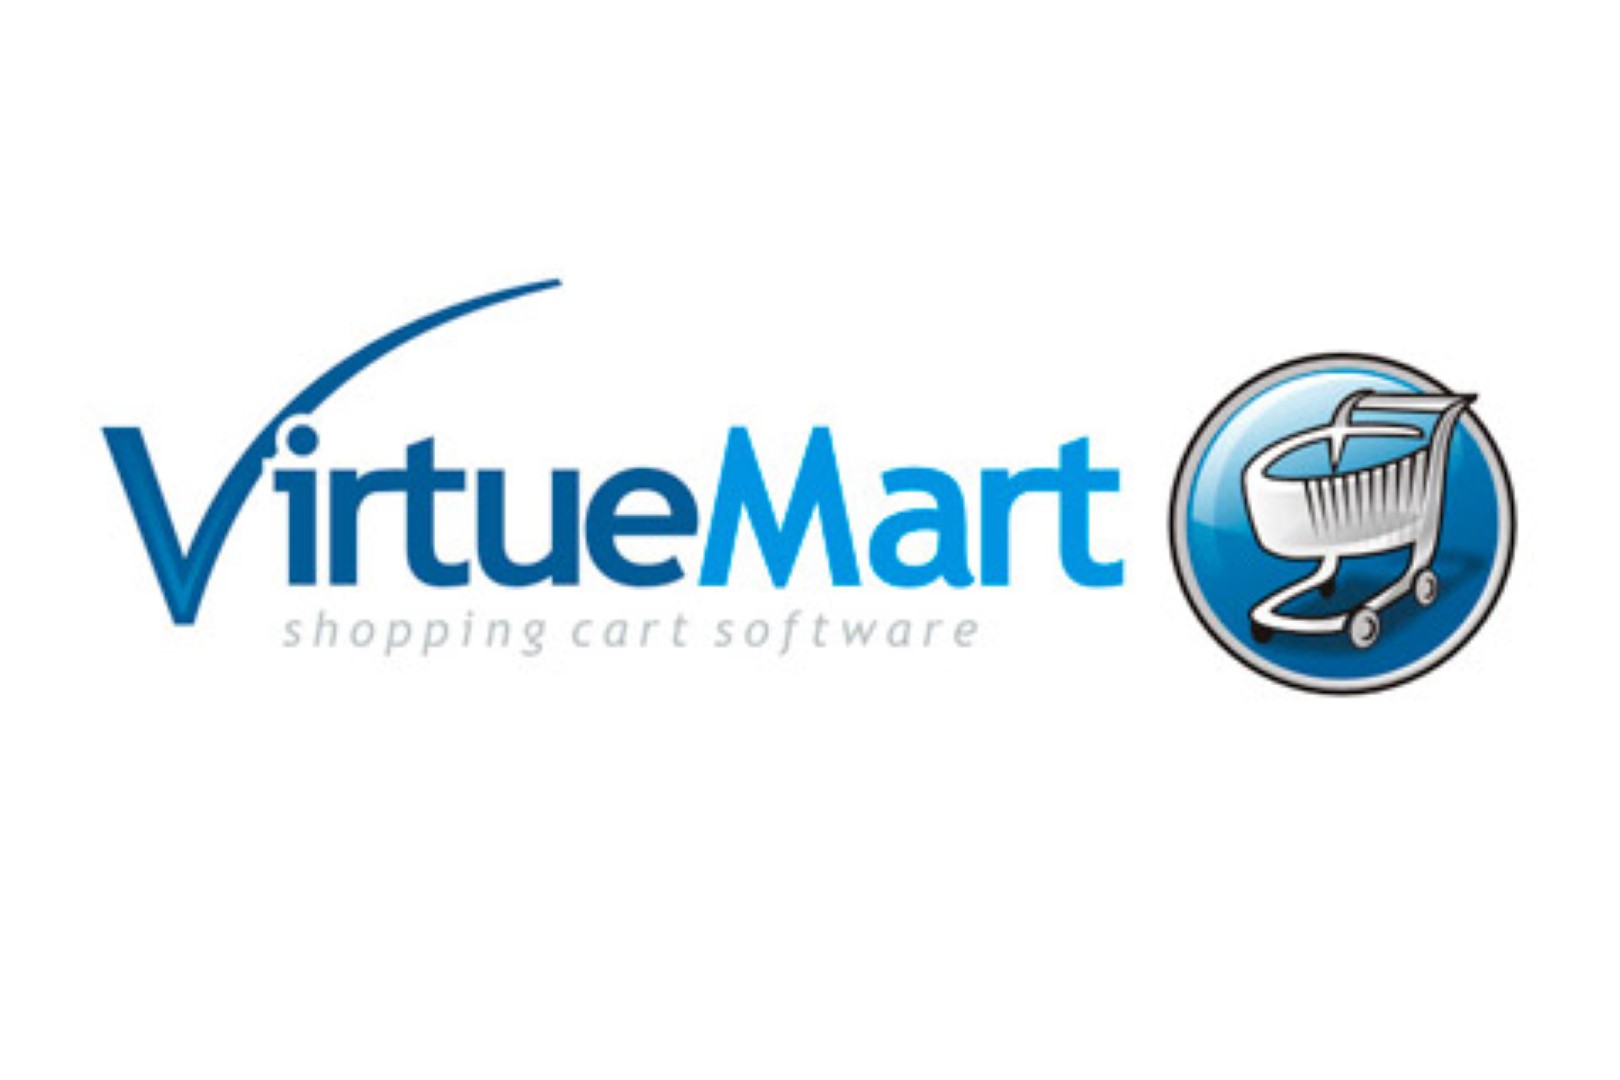 Can I offer product samples or trial versions in Virtuemart?